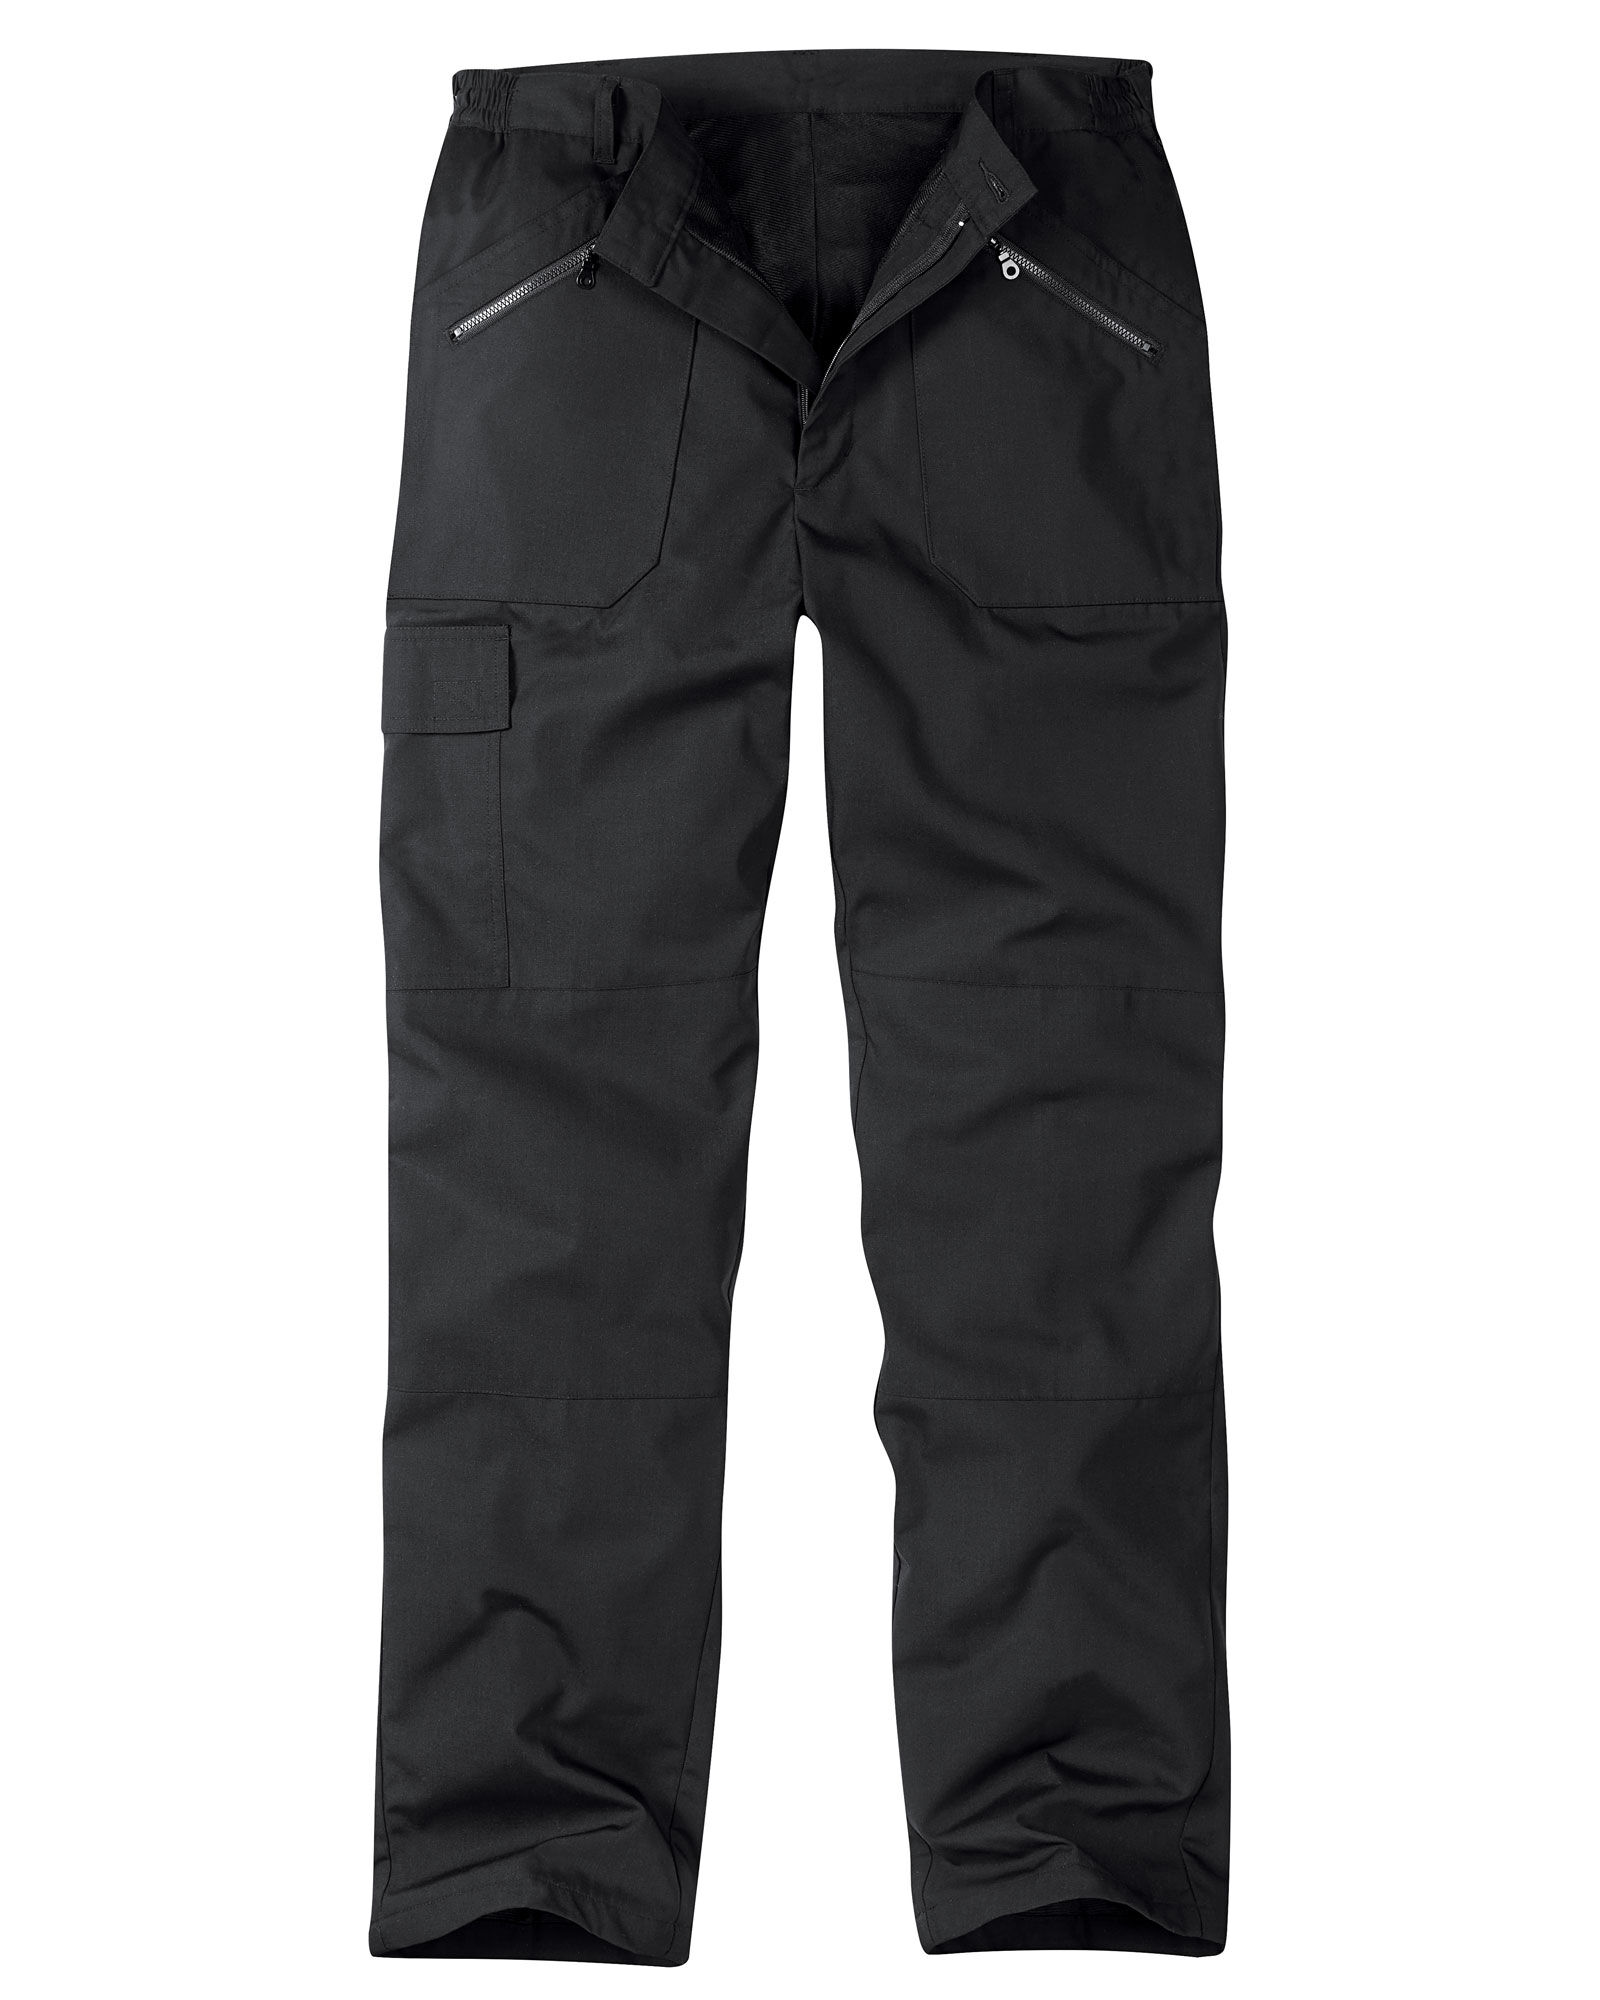 Mens Thermal Lined Fully Elasticated Pull On Trousers  Care Clothing